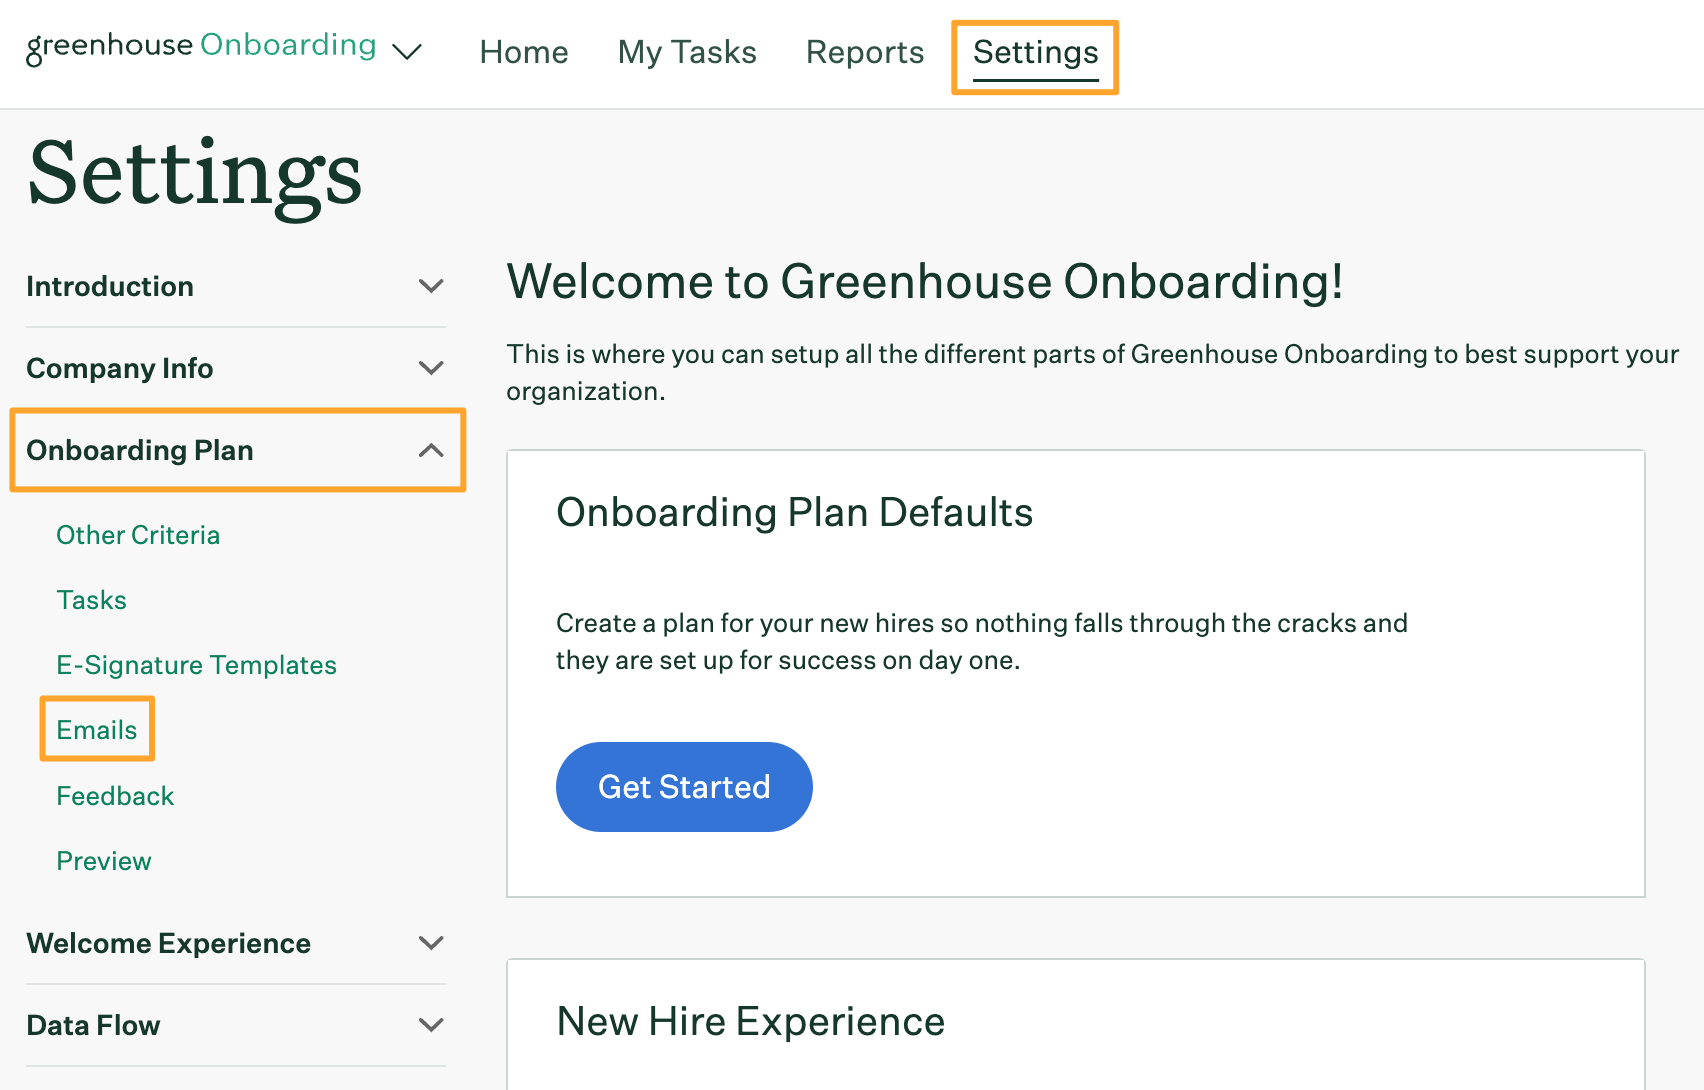 Navigation steps highlighted for Email settings in Greenhouse Onboarding